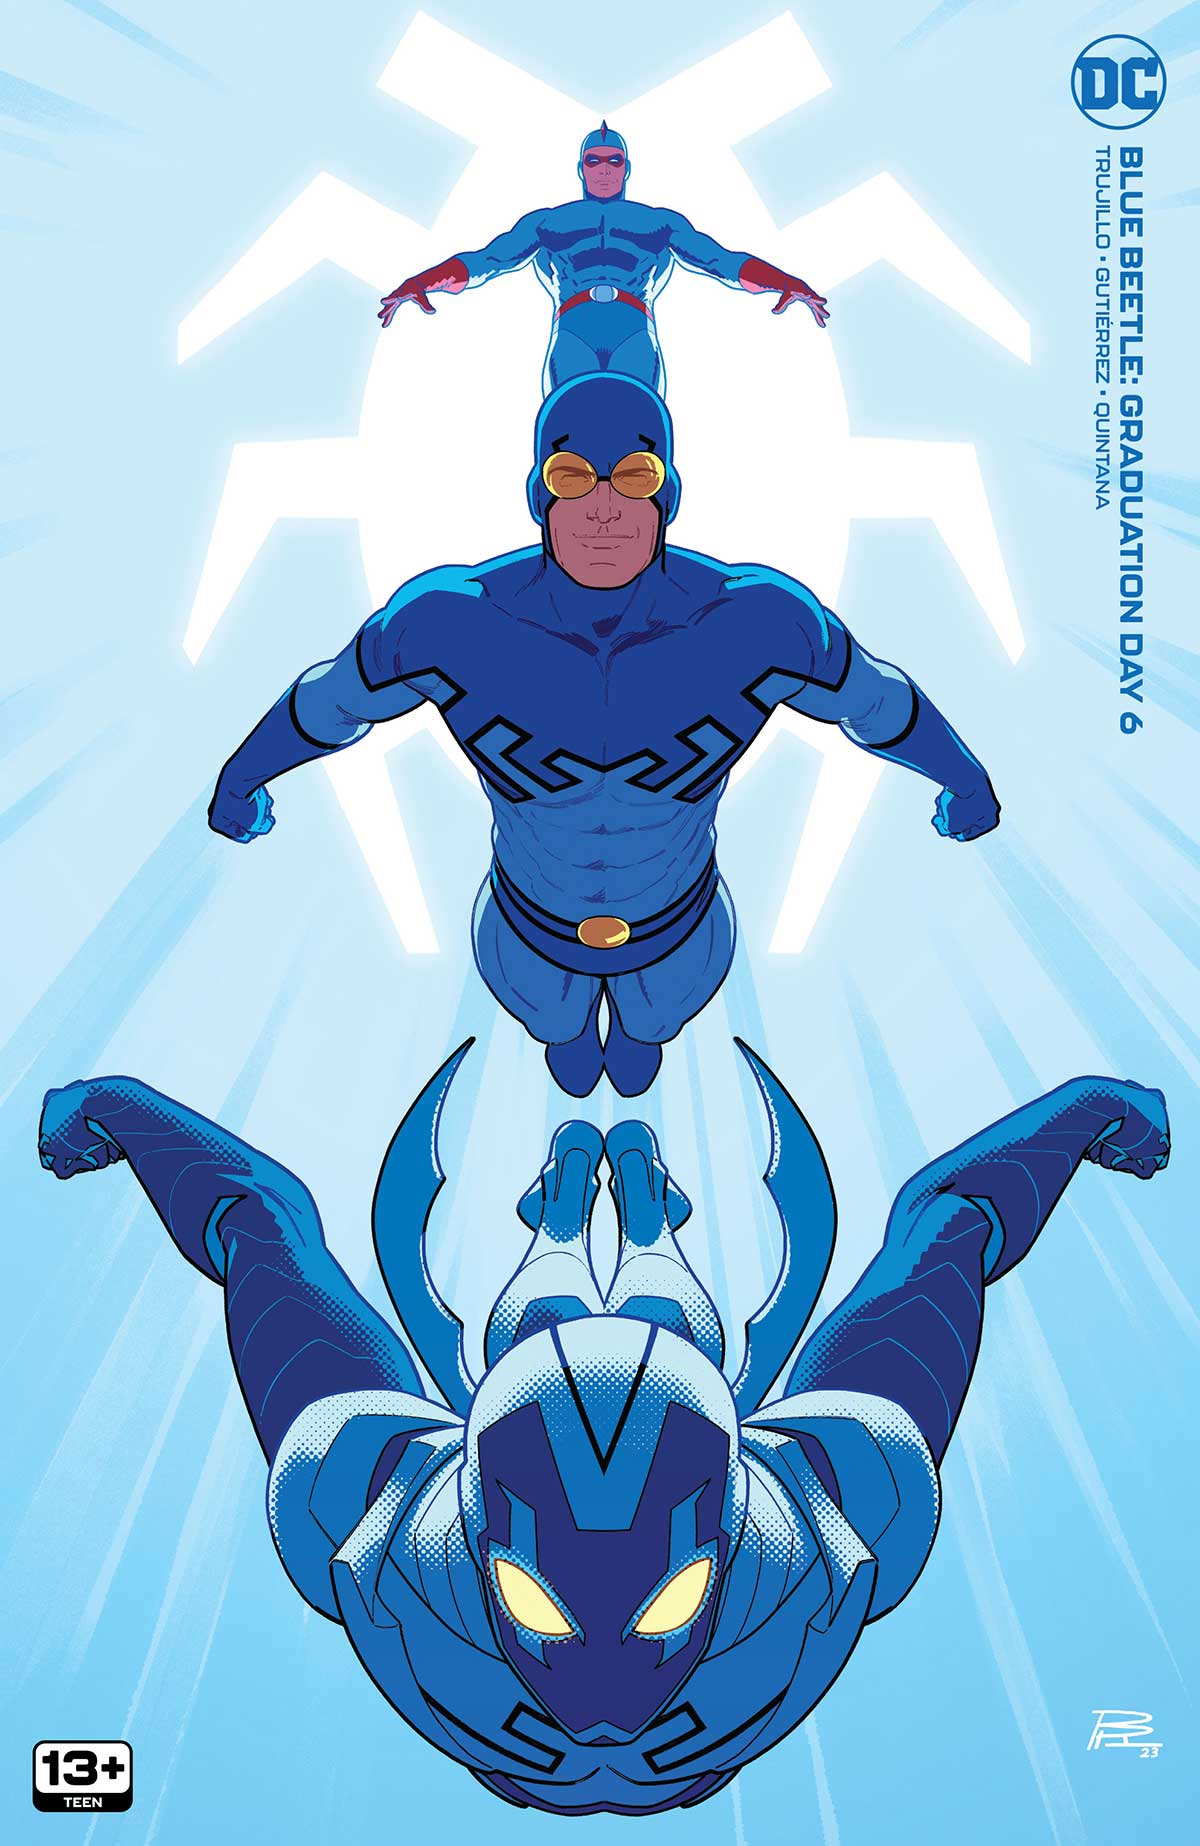 Blue Beetle is a critical hit: here's what the reviews are saying